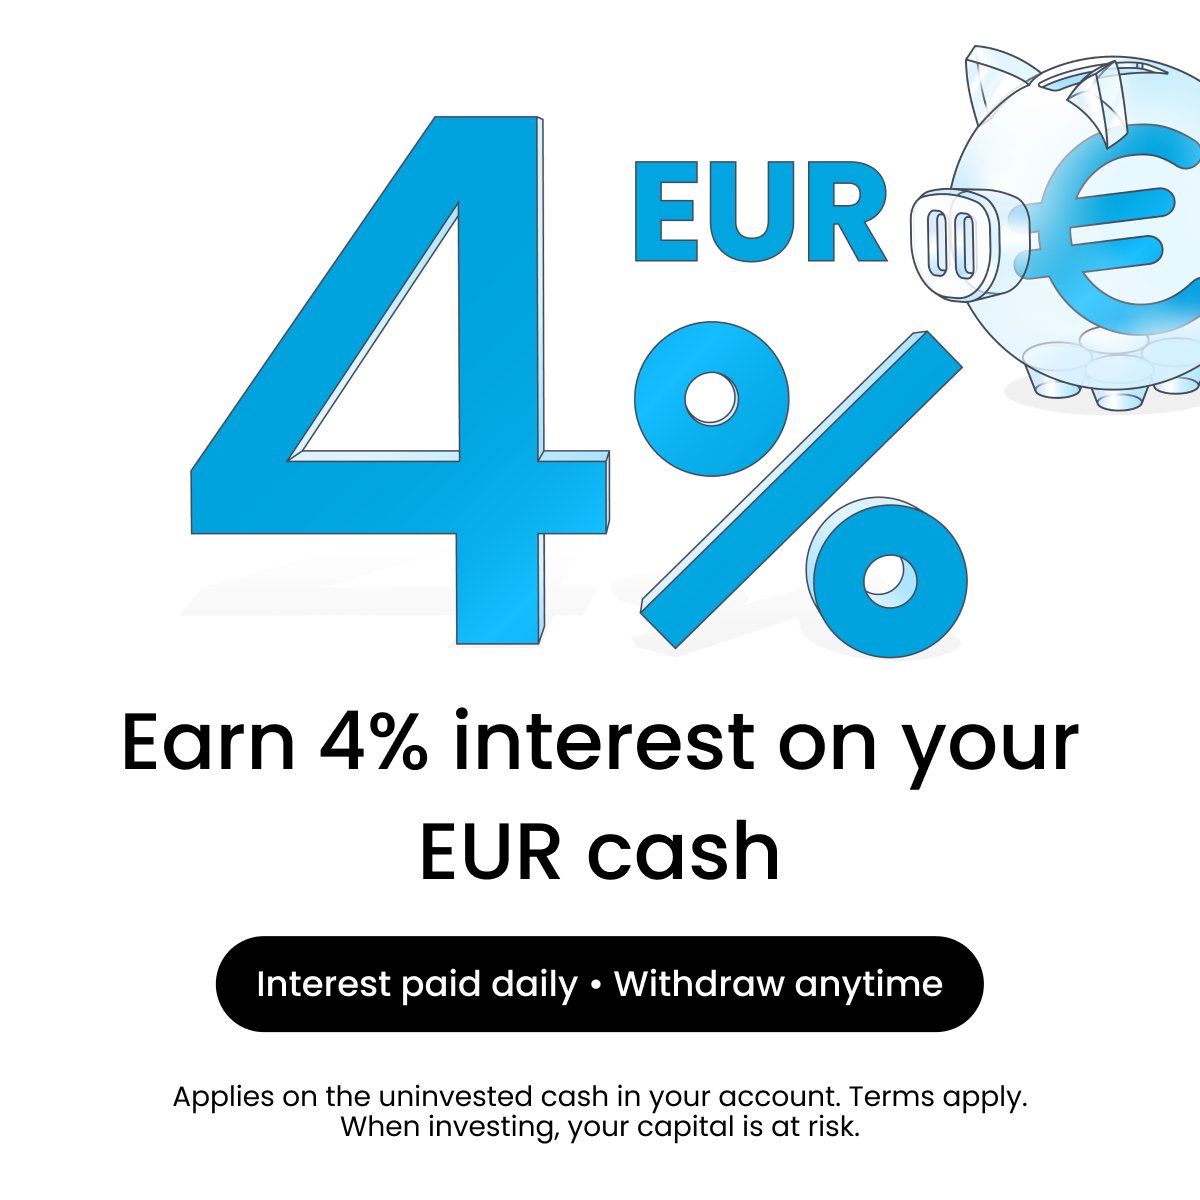 Your uninvested cash just got a boost ✨ Starting today, earn up to 6% with daily payments in your Trading 212 account. Watch your uninvested cash compound with our new interest rates: 🇪🇺 EUR - 4.00% 🇺🇸 USD - 5.00% 🇬🇧 GBP - 4.50% 🇵🇱 PLN - 3.75% 🇨🇿 CZK - 2.50% 🇷🇴 RON - 3.00% 🇭🇺